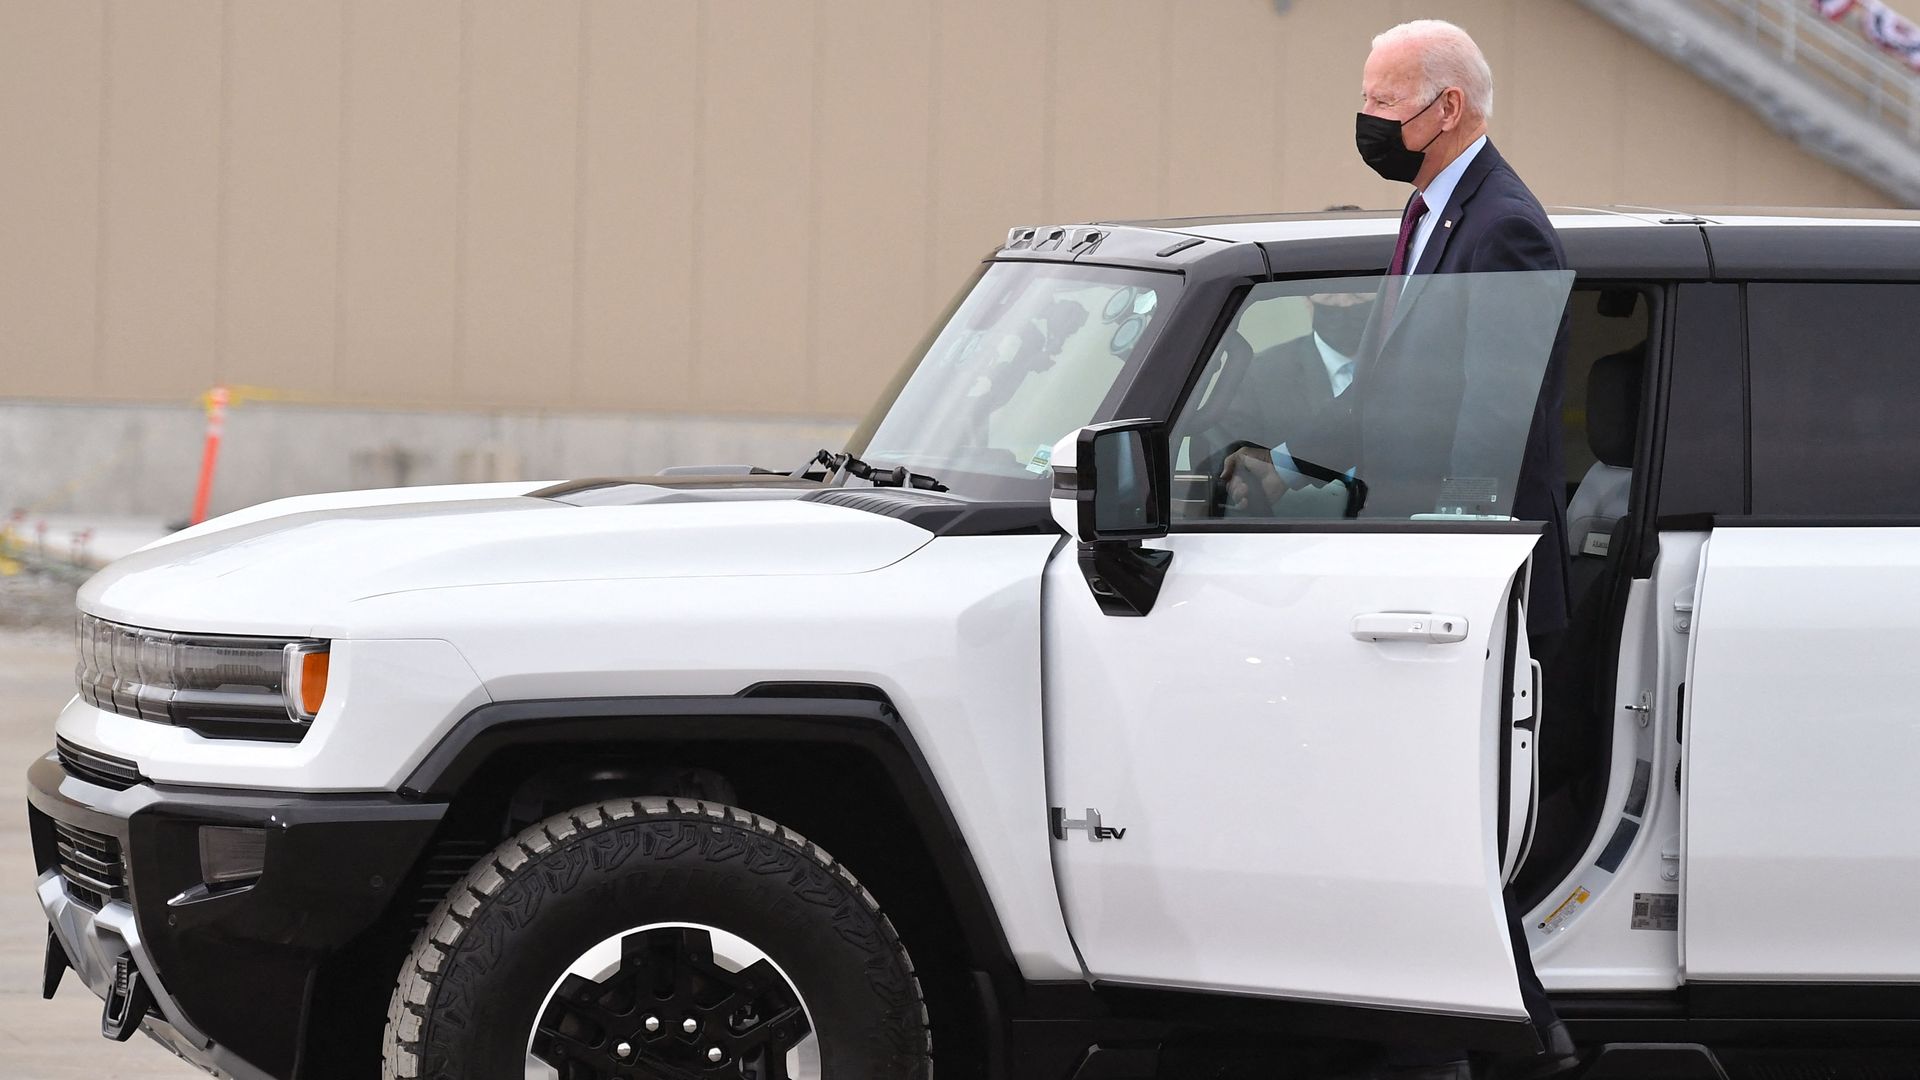 President Biden is seen standing in the door sill of a new electric Hummer while visiting Michigan.